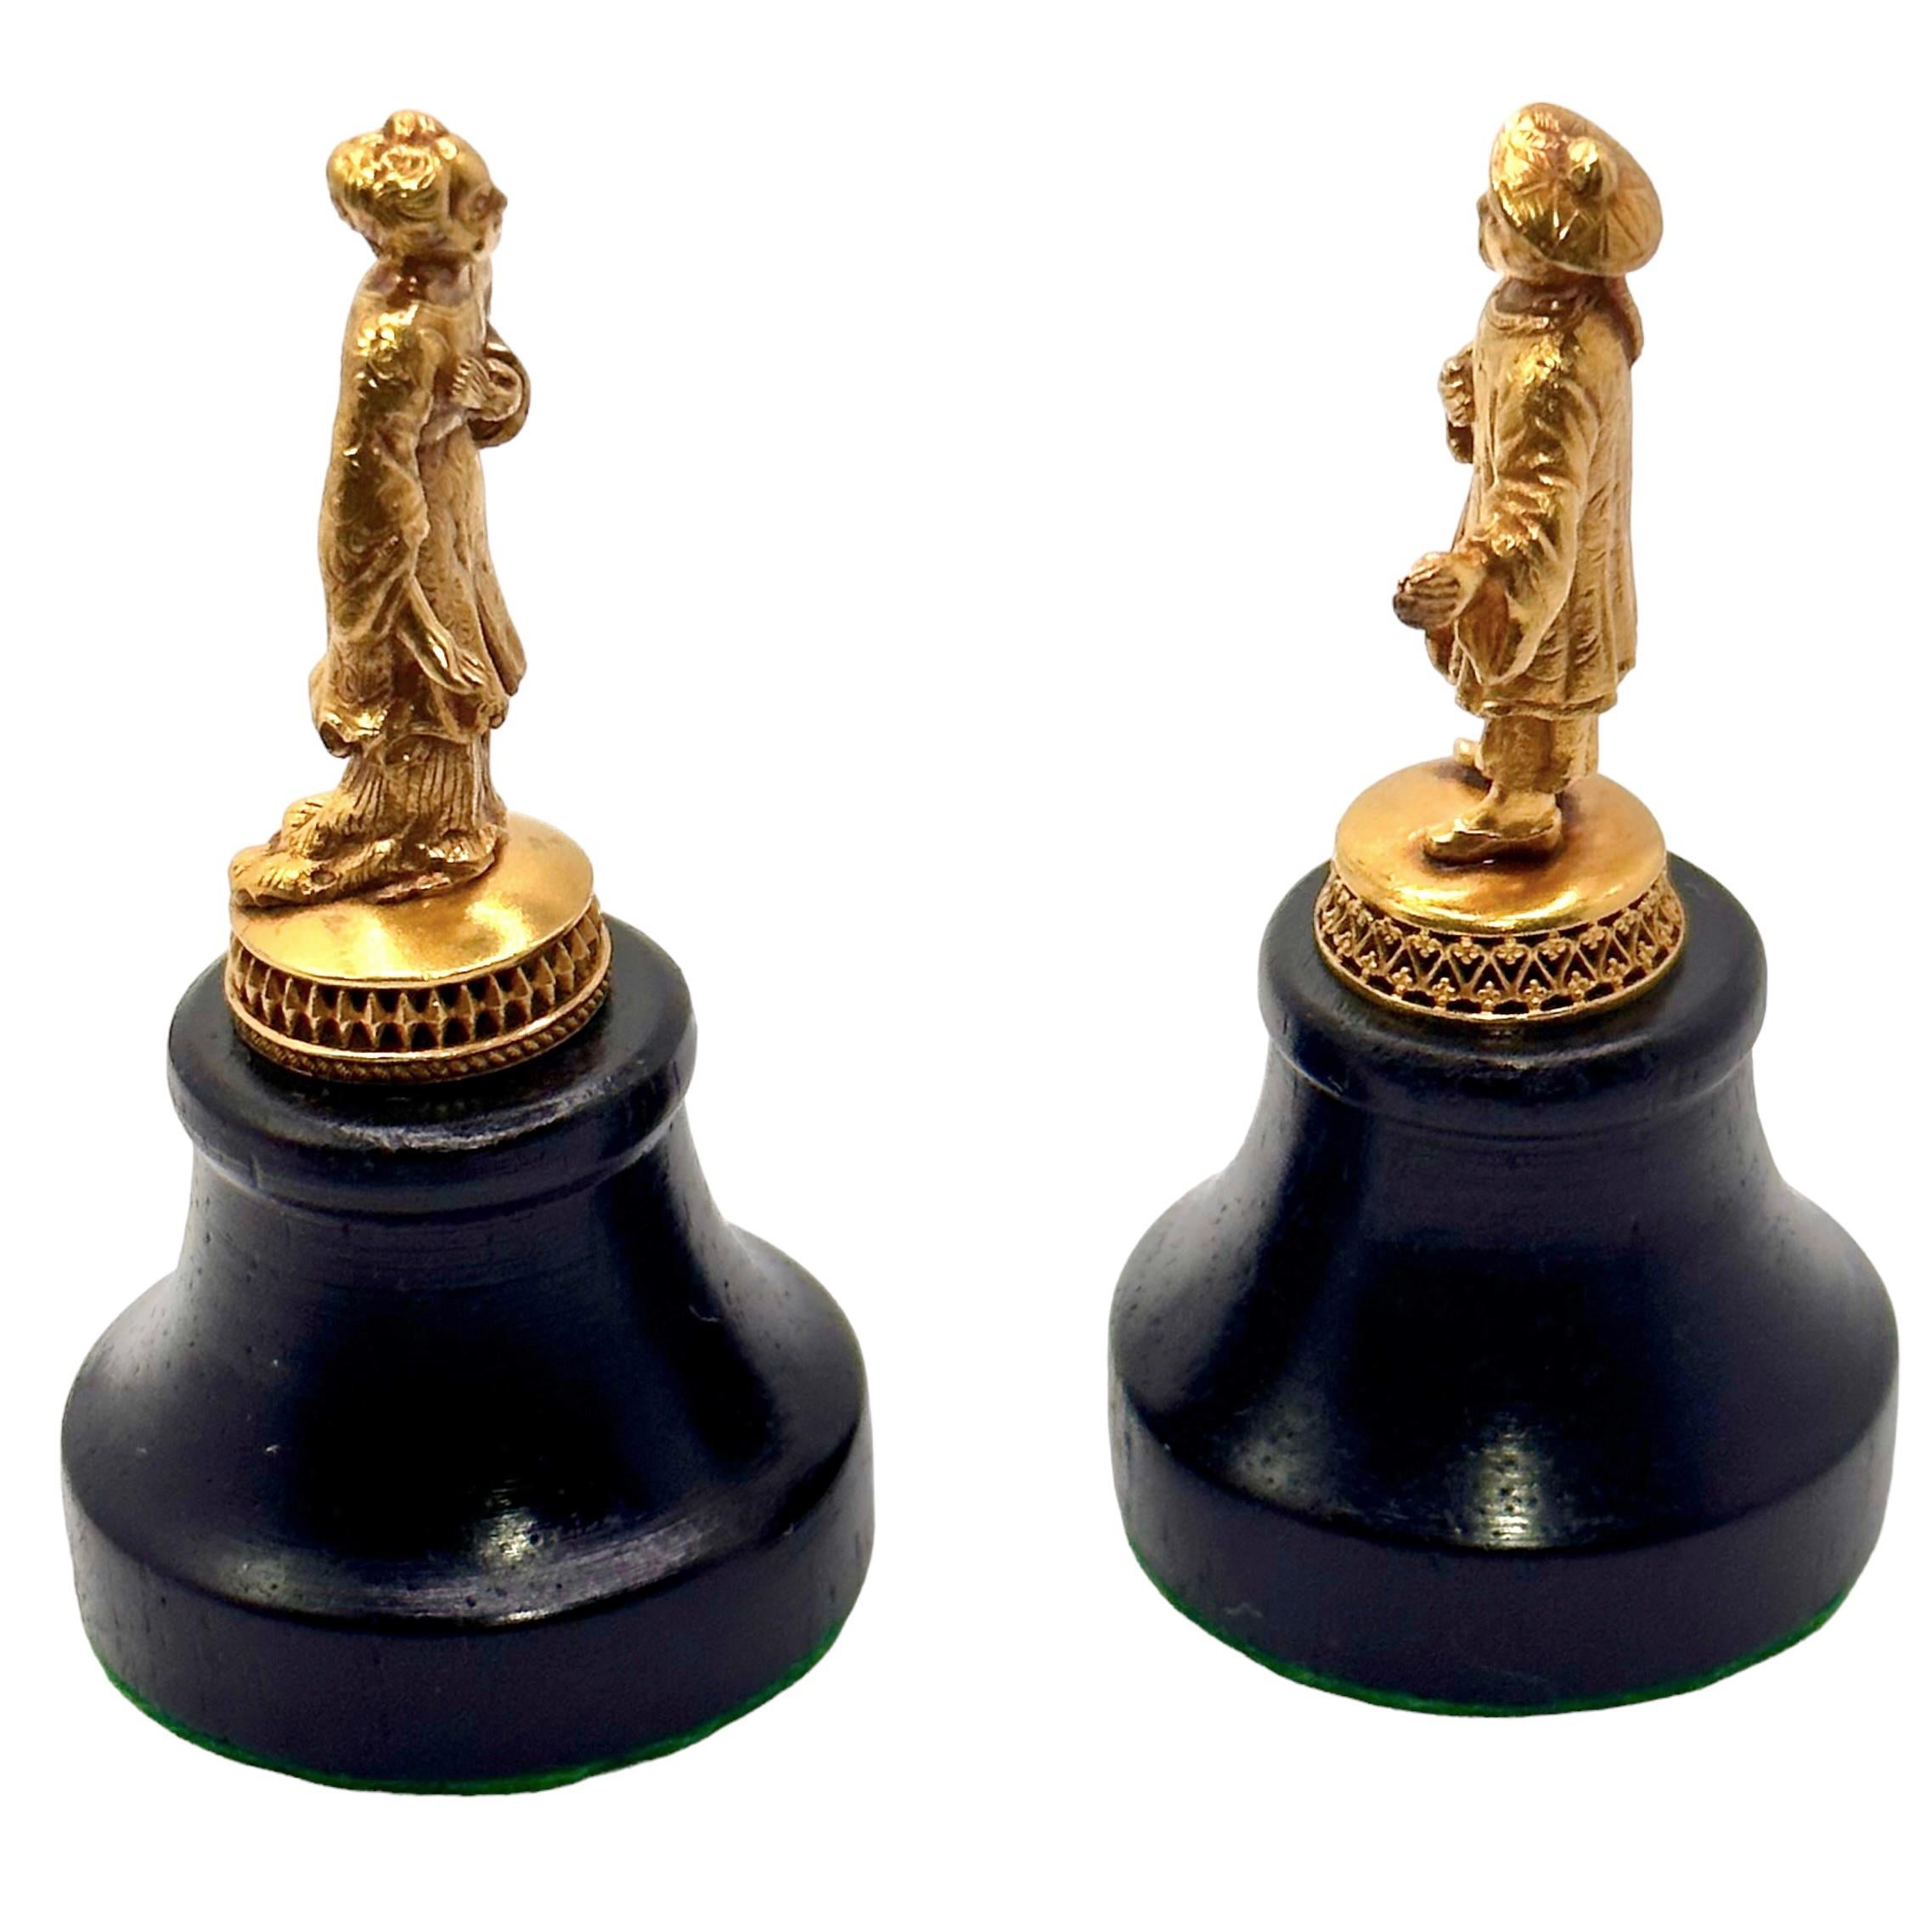 Artist Pair of Extraordinary Antique Dutch Gold Asian Caricature Figurines on Bases   For Sale